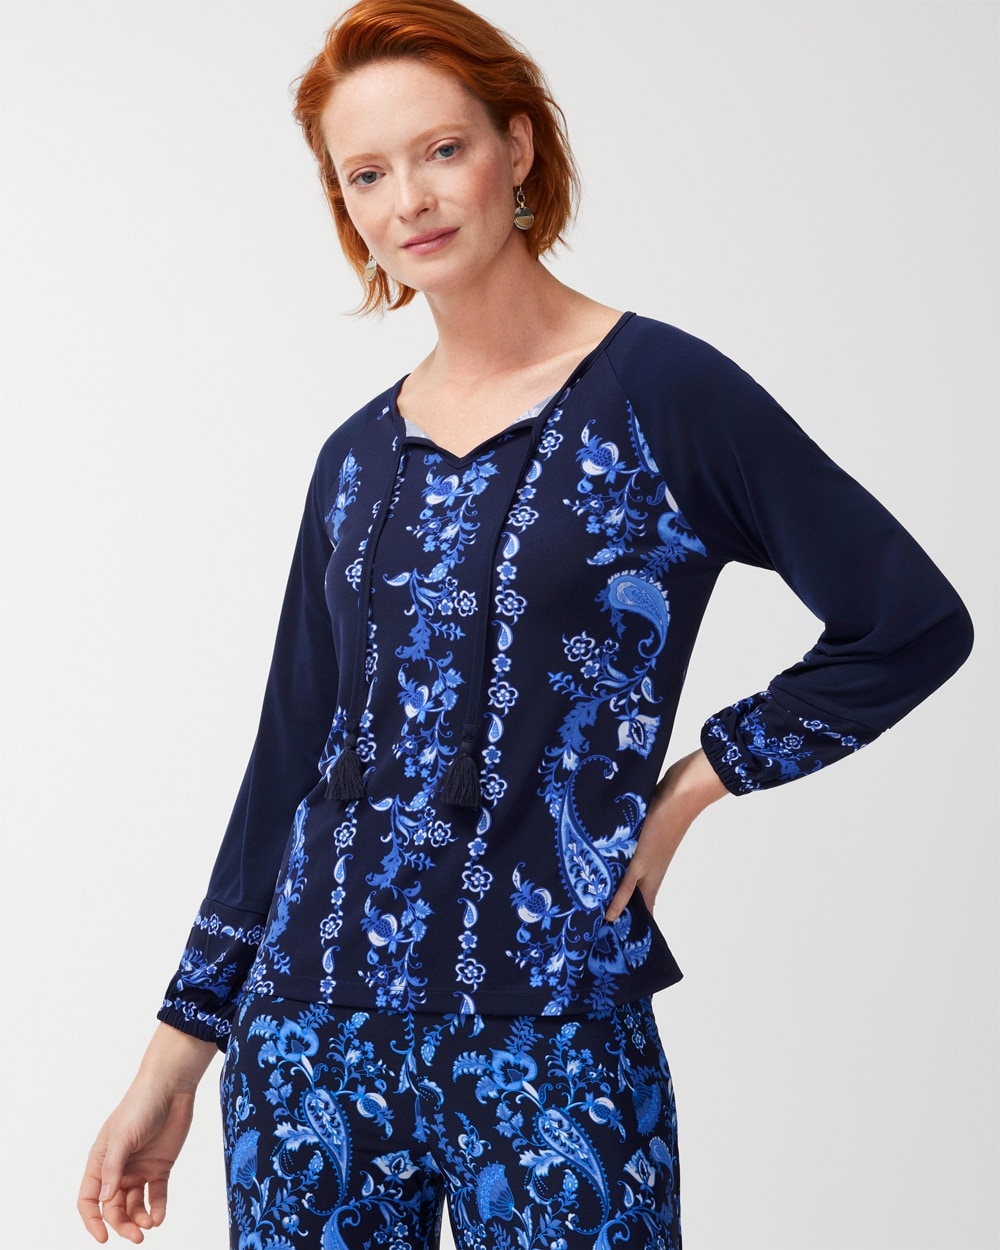 Whimsy Folklore Bishop-Sleeve Top